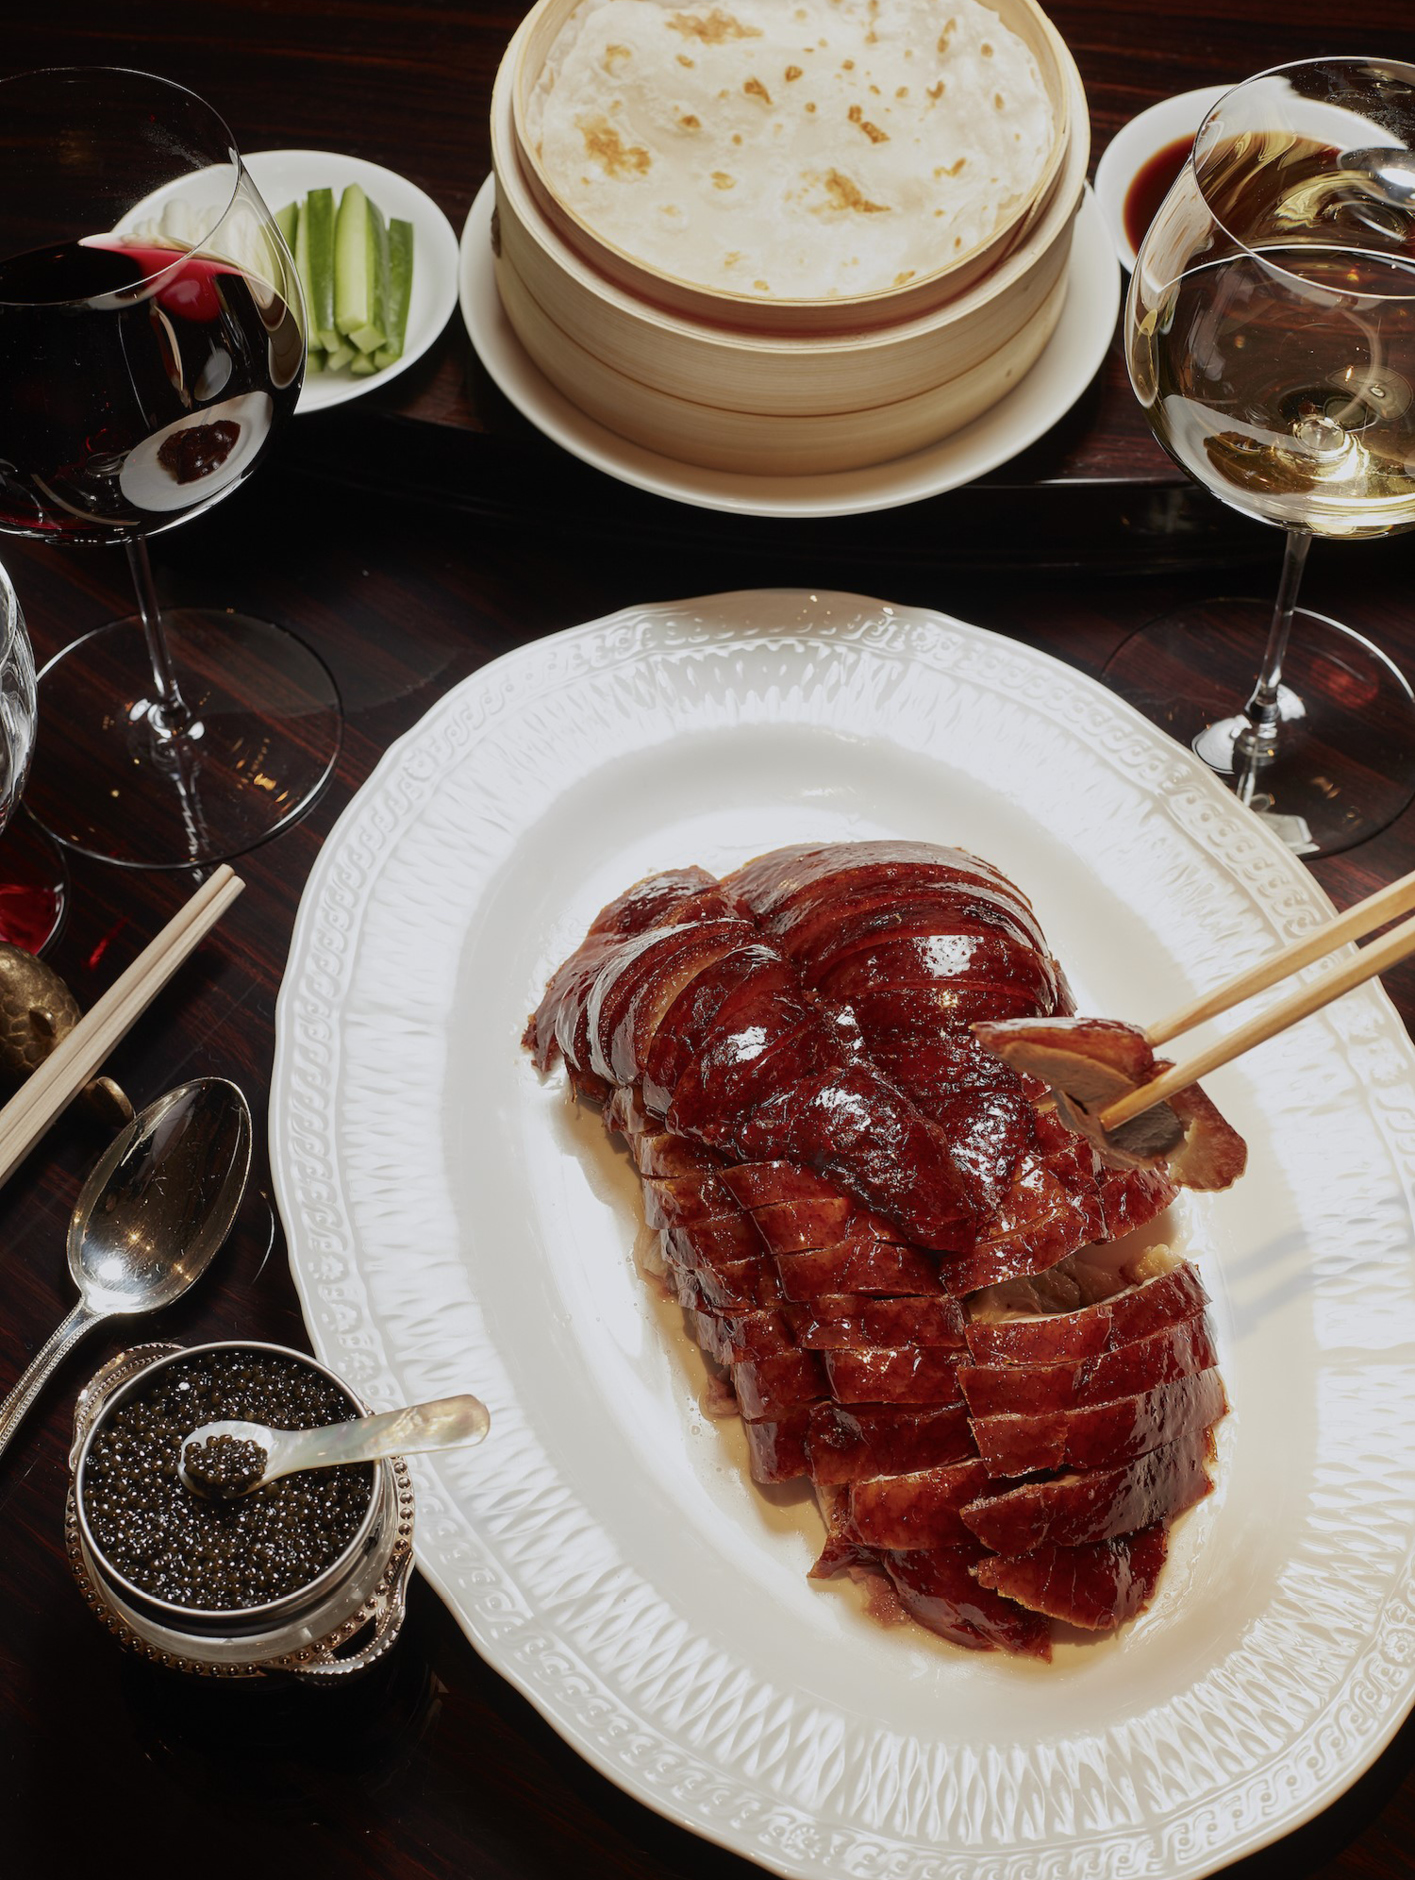 Park Chinois serves all your favourite luxury Chinese dishes